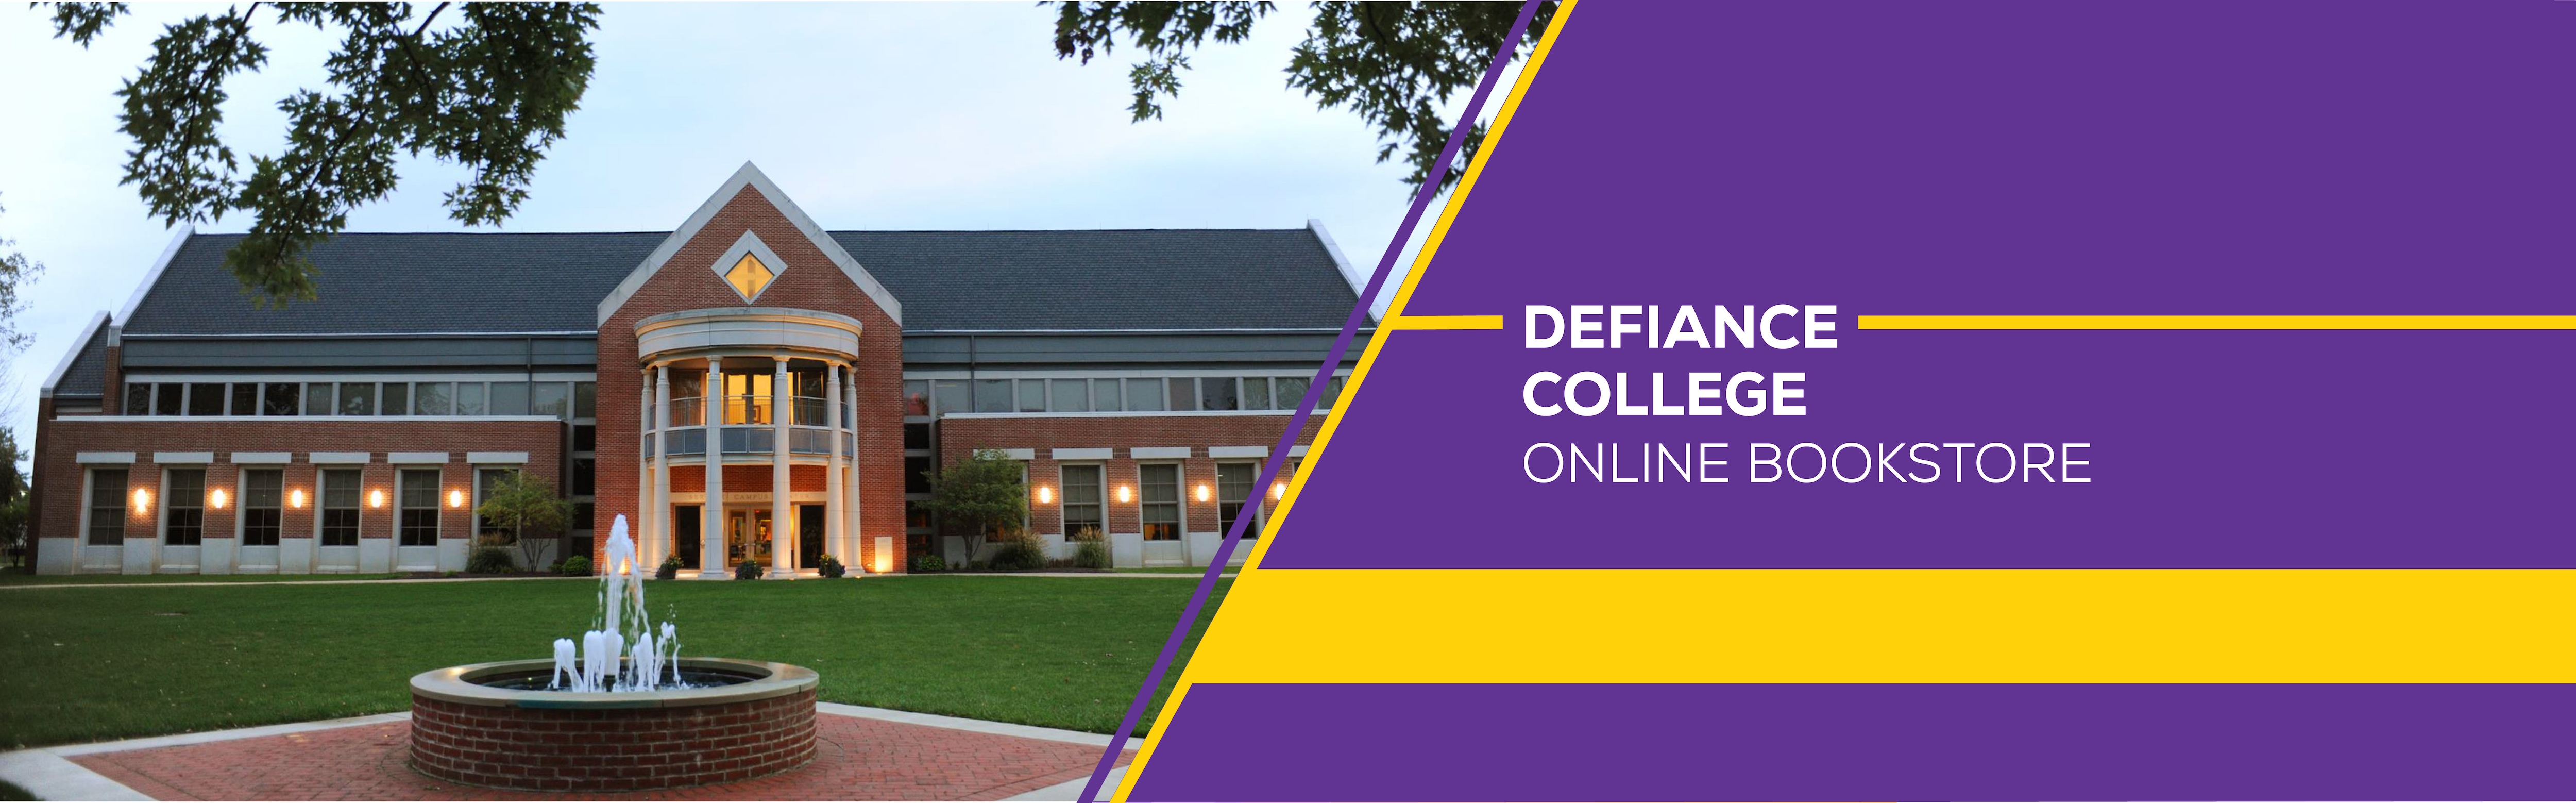 Overview - E-Book access for Defiance College - Pilgrim Library at Defiance  College